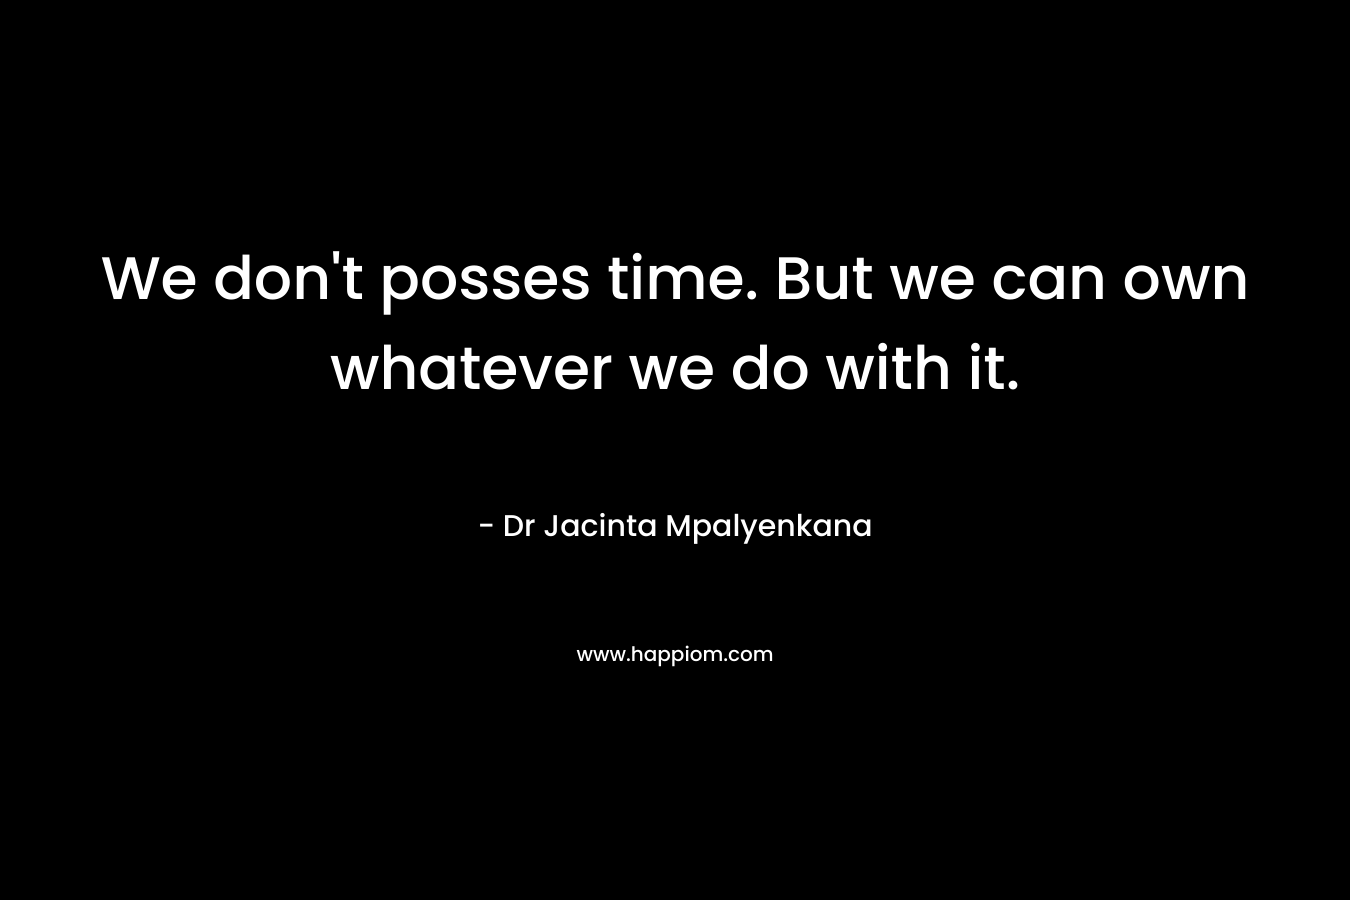 We don’t posses time. But we can own whatever we do with it. – Dr Jacinta Mpalyenkana